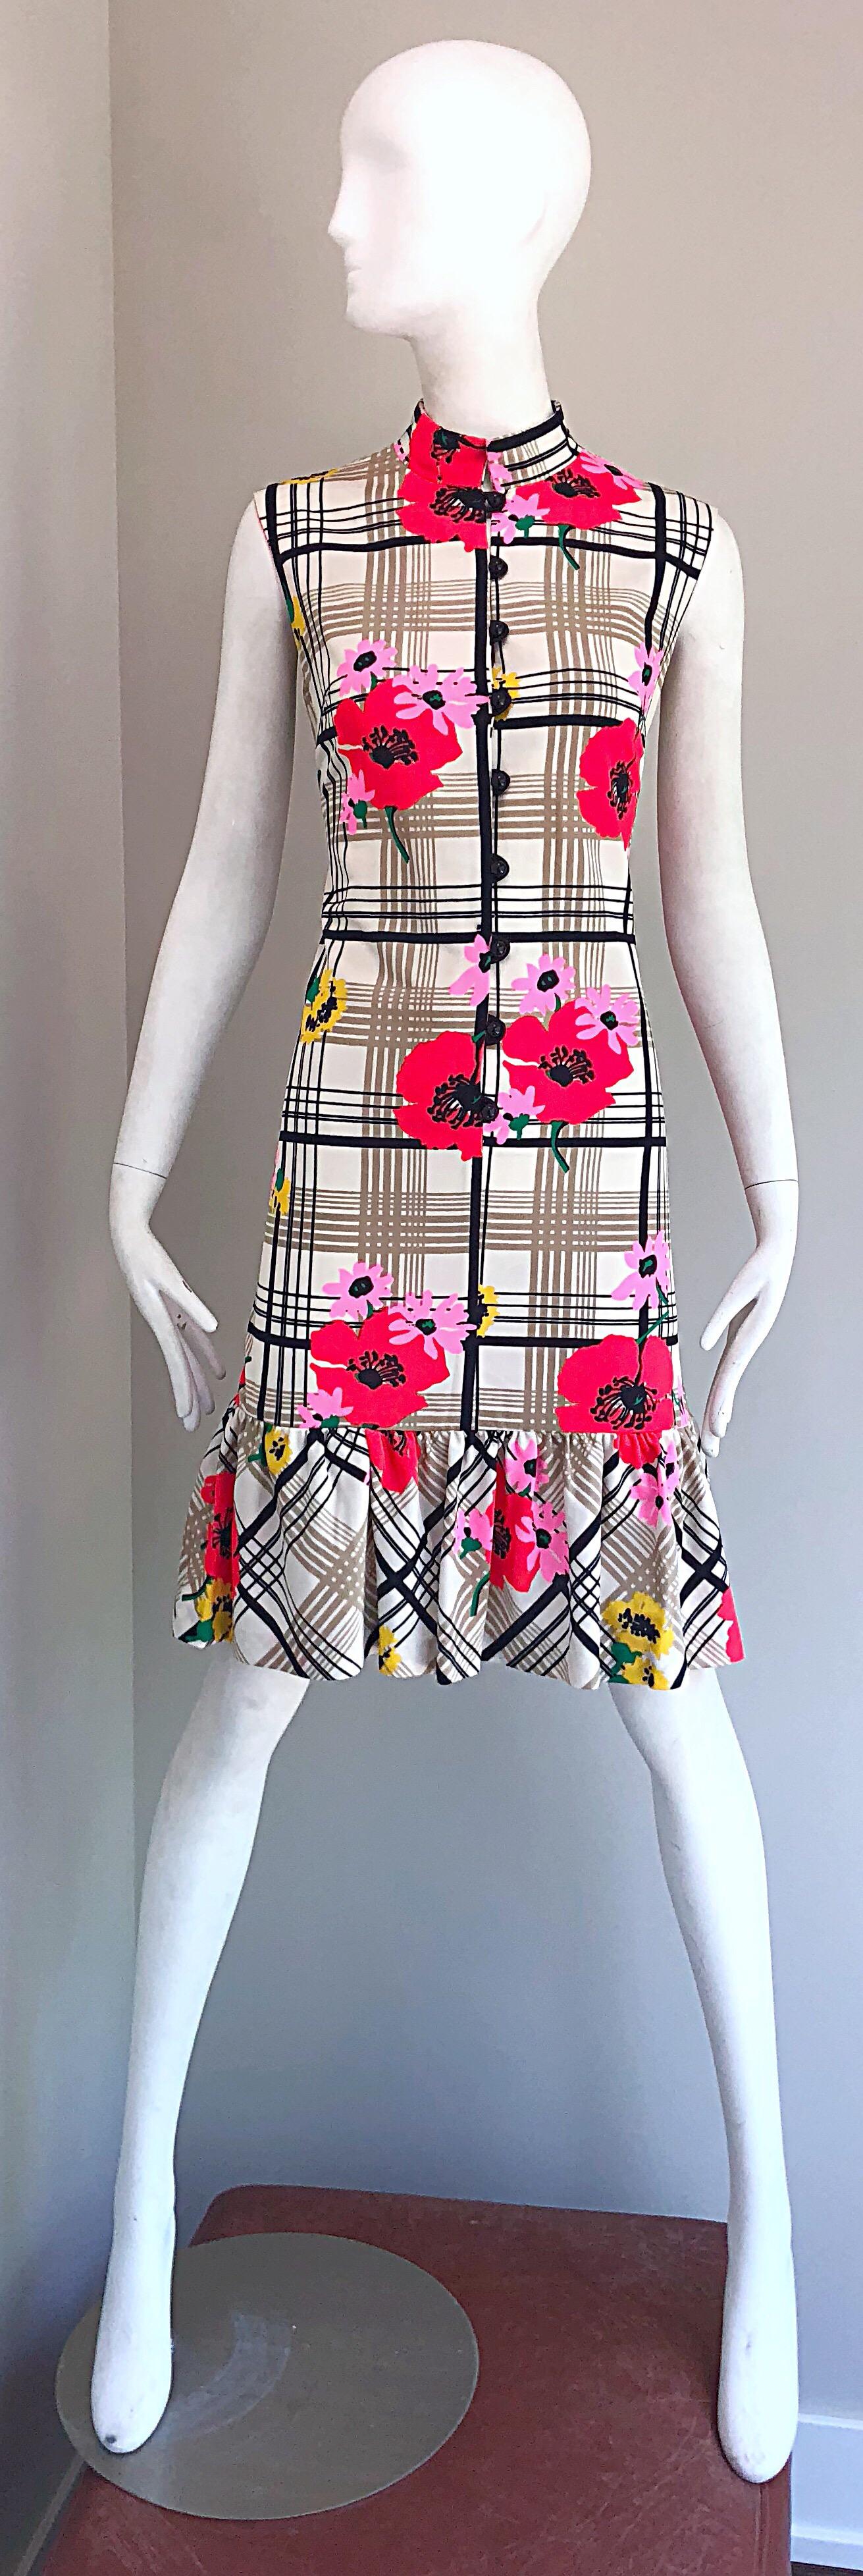 Chic 1960s black and white colorful jersey shift dress! Not your typical black and white dress. Features contrasting stripes in taupe with bright vivid coral, pink and yellow flowers throughout to add just the right amount of tropical. Black lacquer